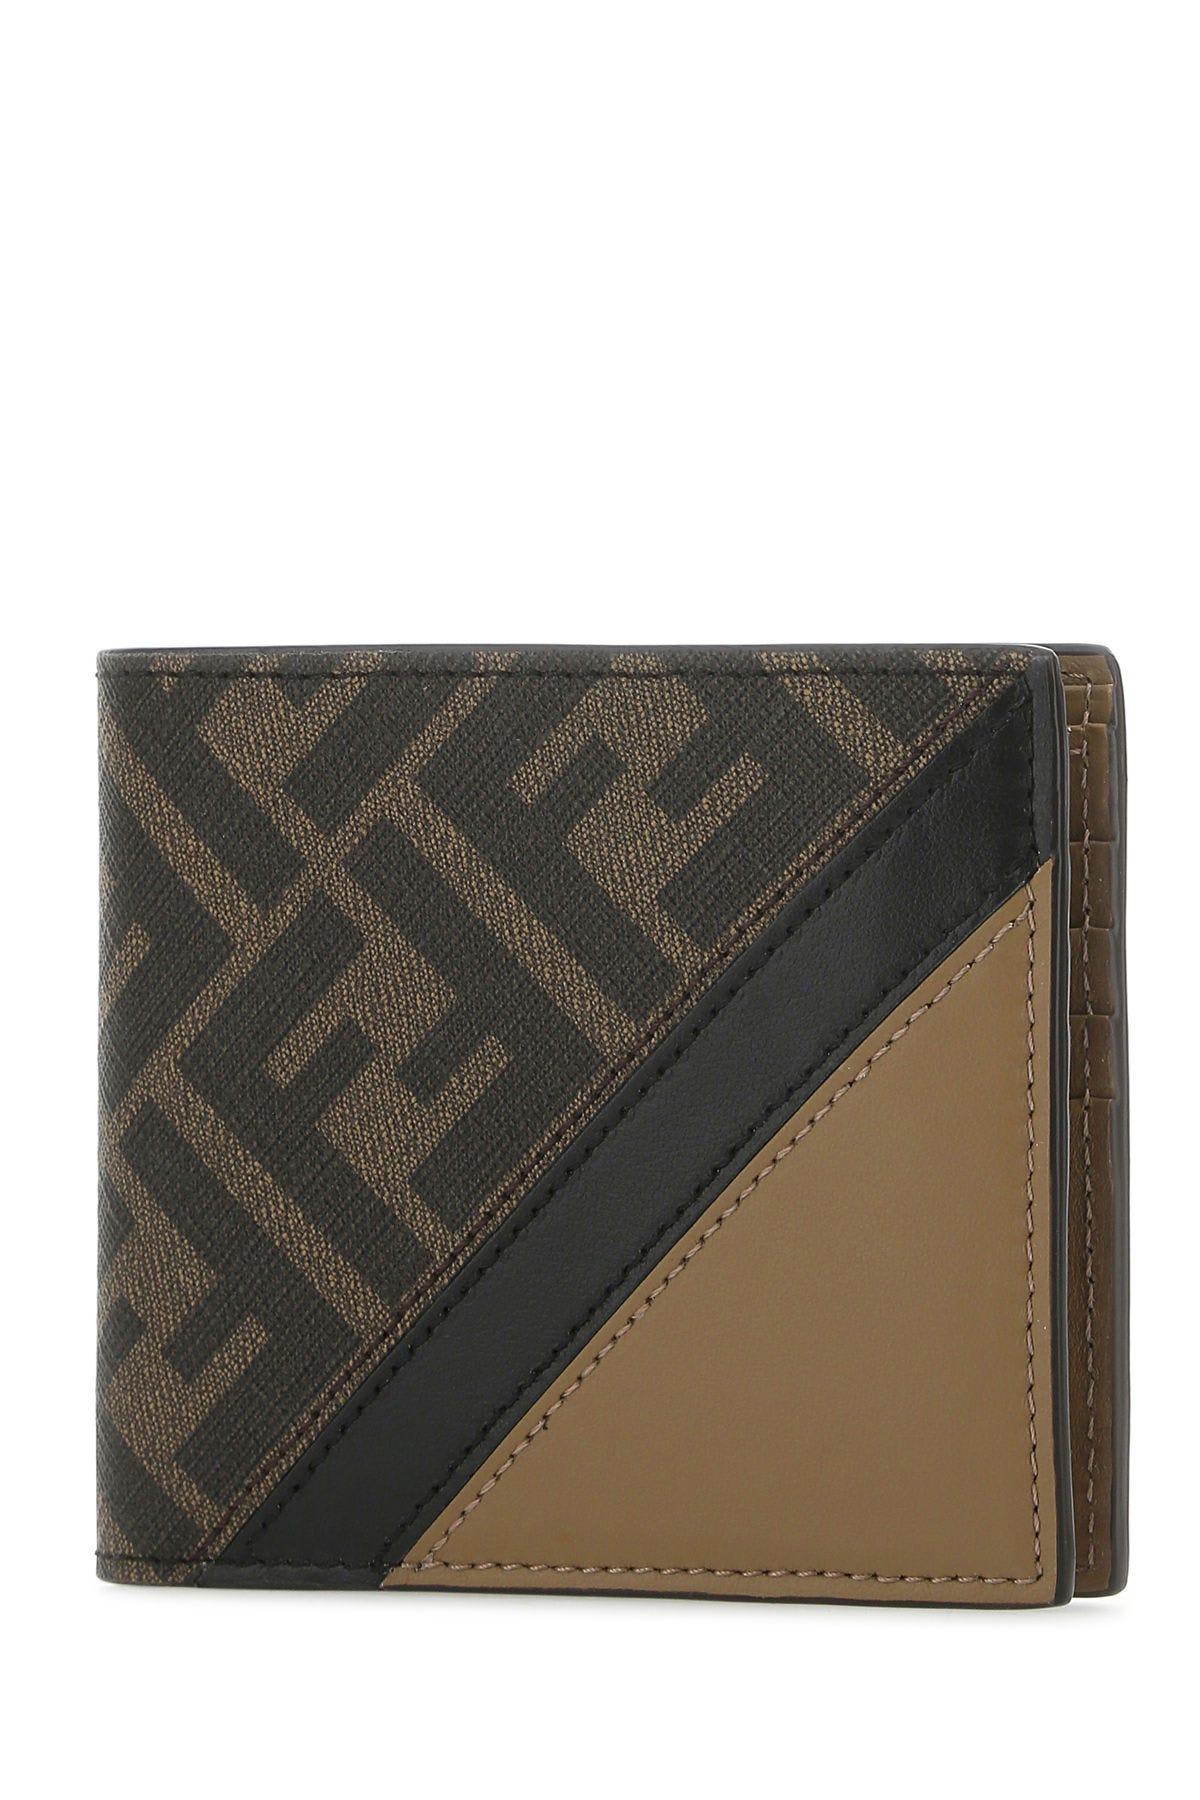 Shop Fendi Multicolor Fabric And Leather Wallet In Tab.mt+sand+nero